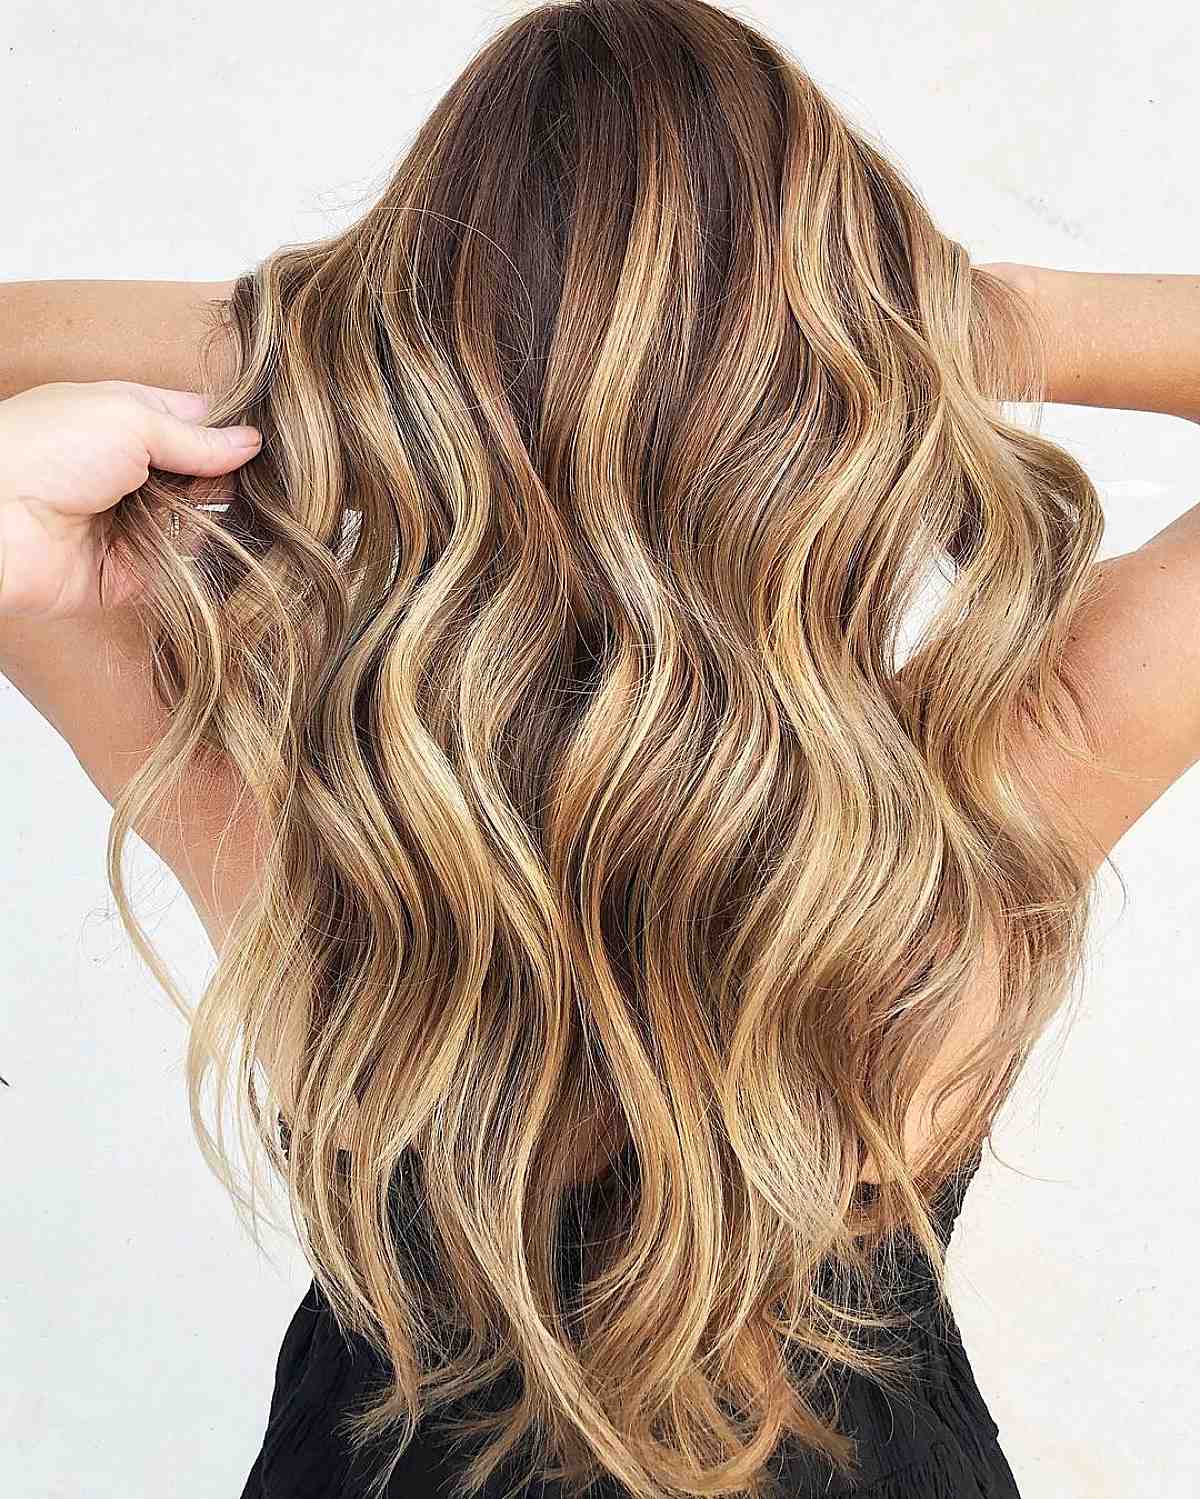 The Best Ash Blonde and Caramel Balayage